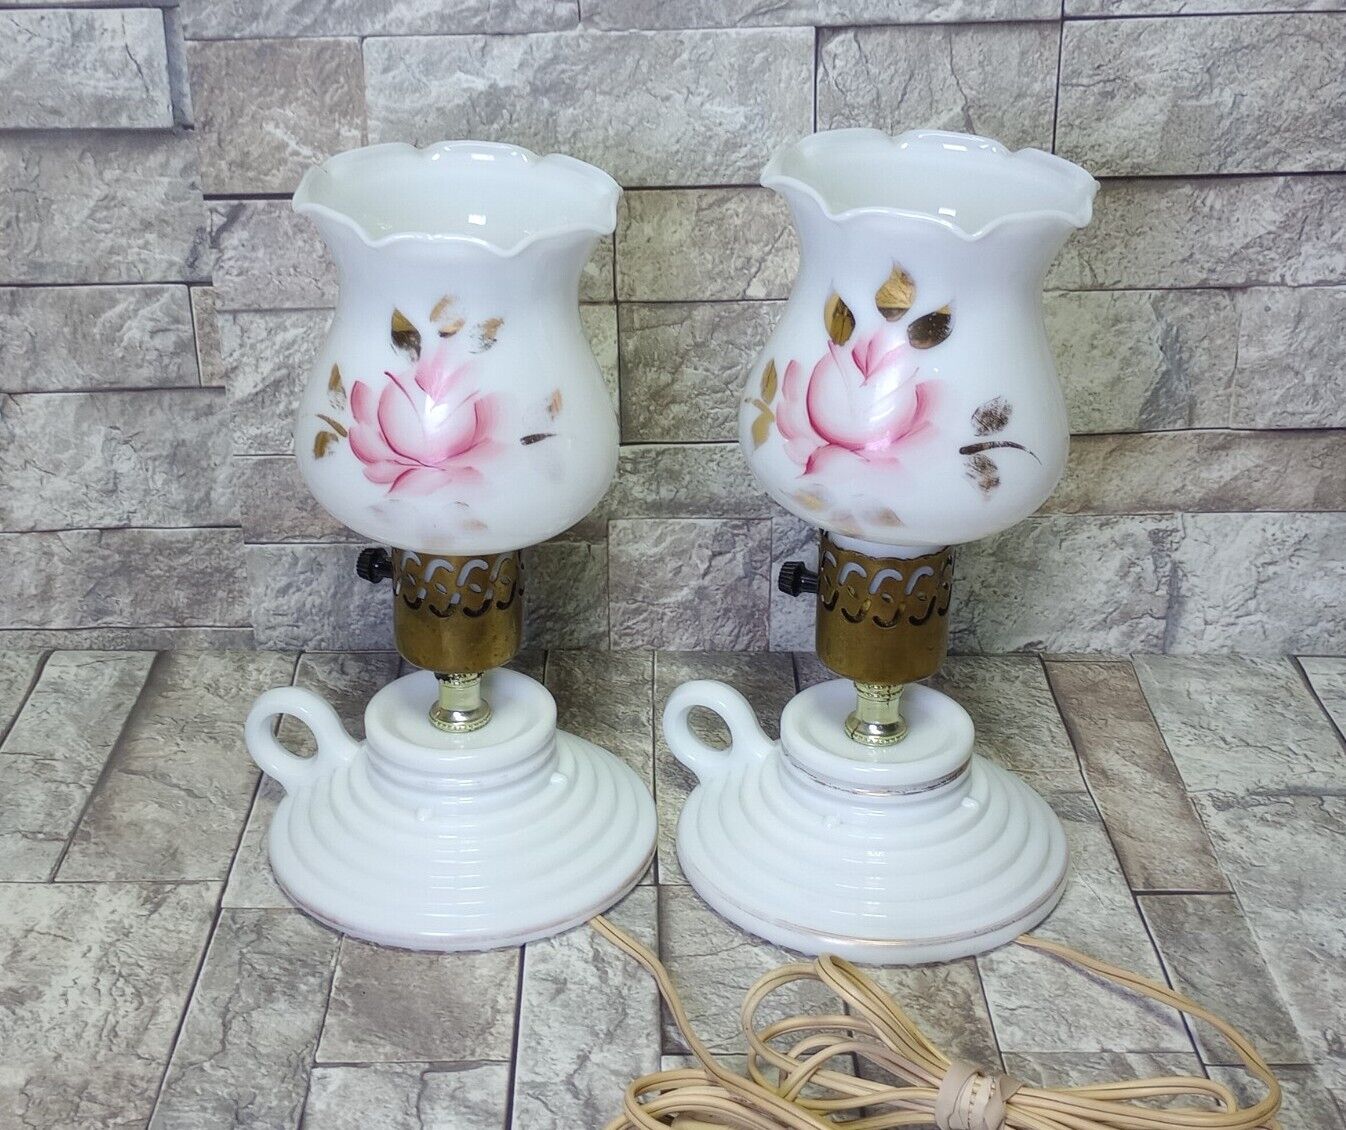 🌹Vintage Milk Glass Table Lamp Set (2) w/ Painted Roses & Gold Painted Leaves🌹